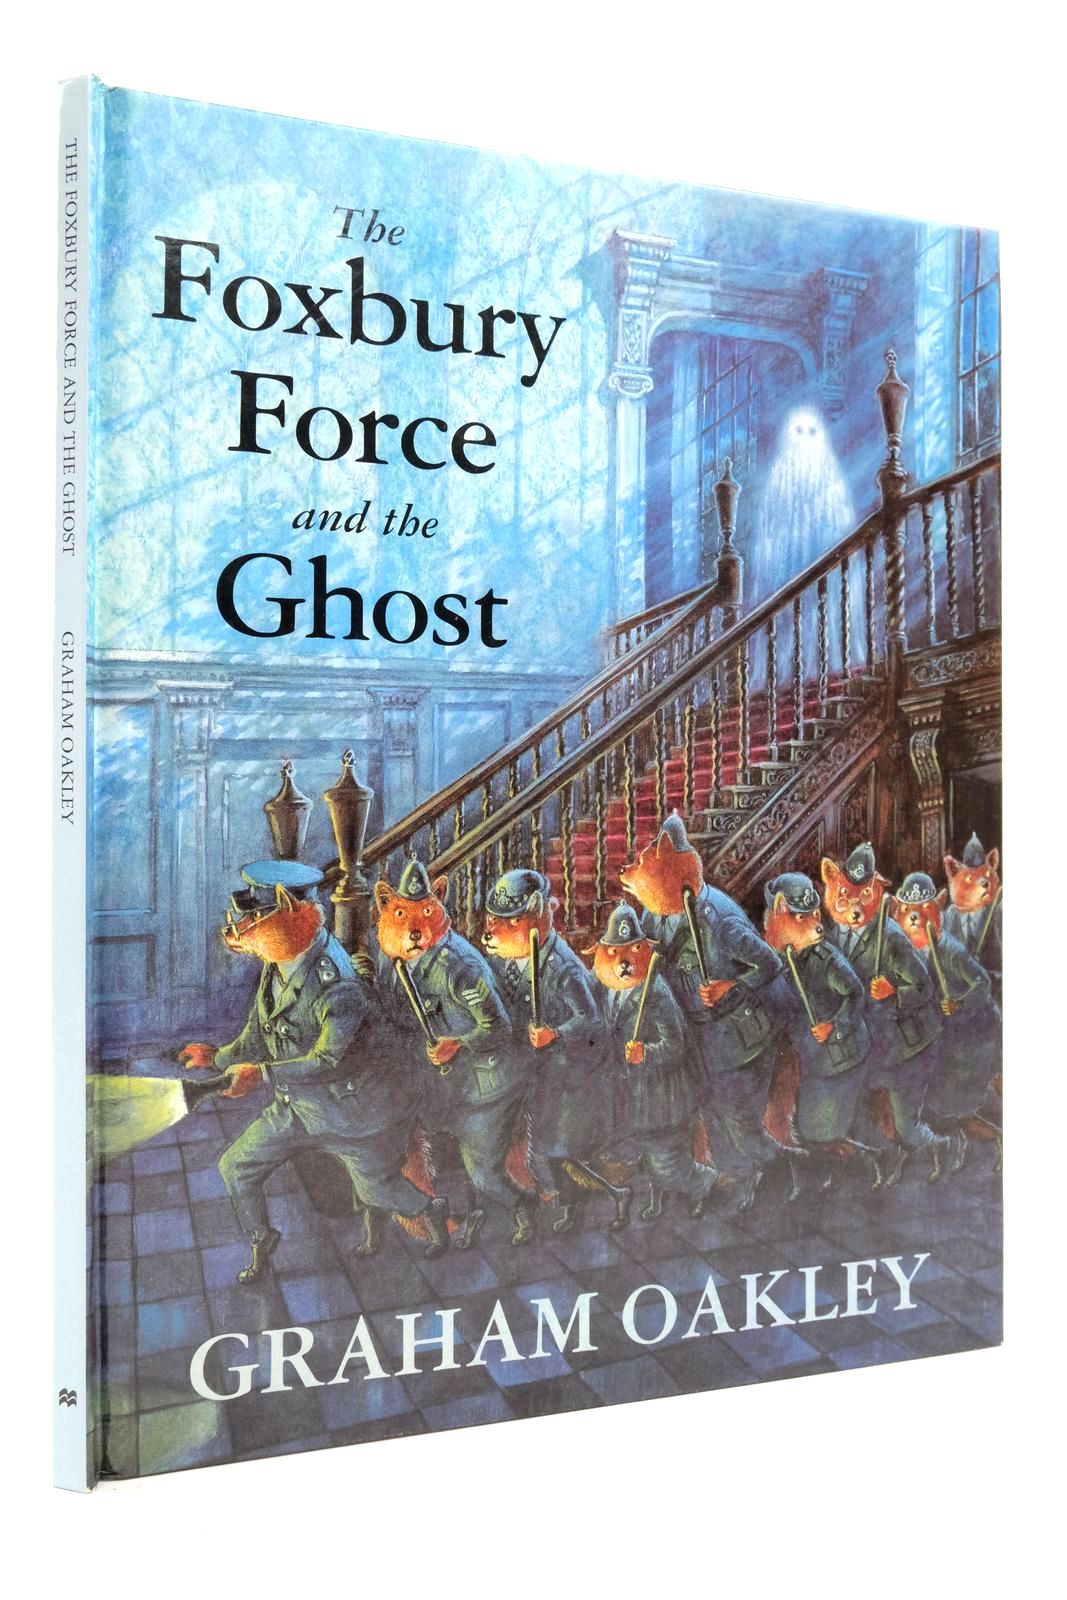 Photo of THE FOXBURY FORCE AND THE GHOST written by Oakley, Graham illustrated by Oakley, Graham published by Macmillan Children's Books (STOCK CODE: 2138636)  for sale by Stella & Rose's Books